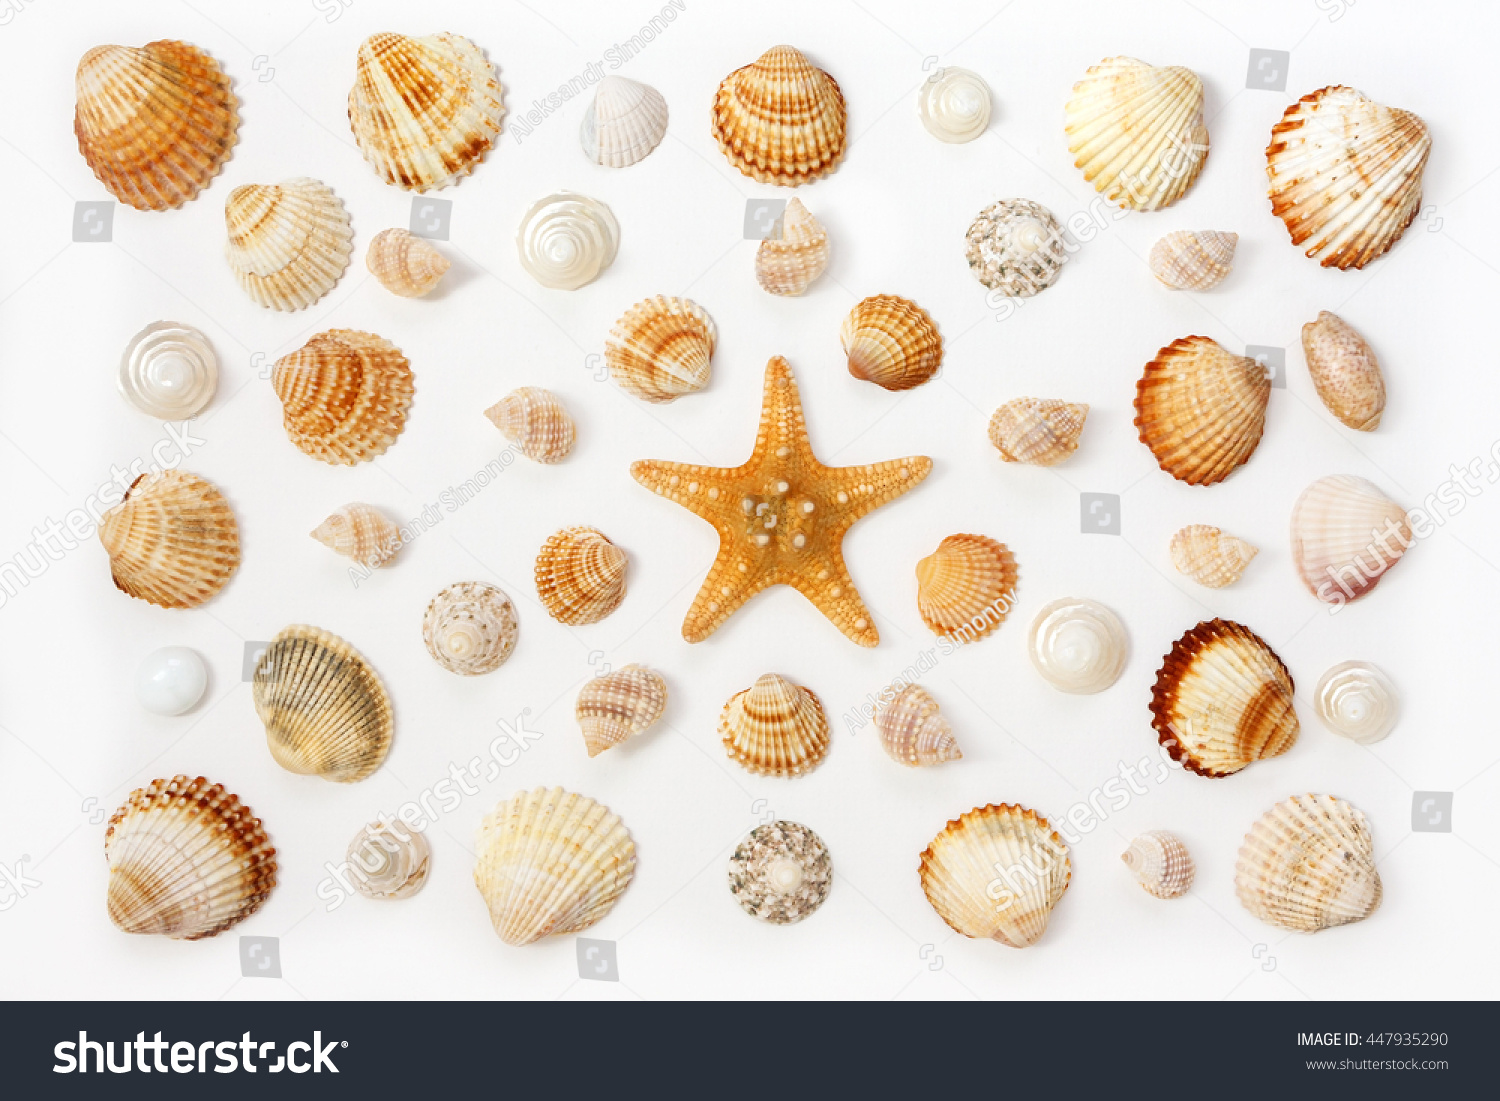 composition of exotic sea shells and starfish on a white background. top view. #447935290